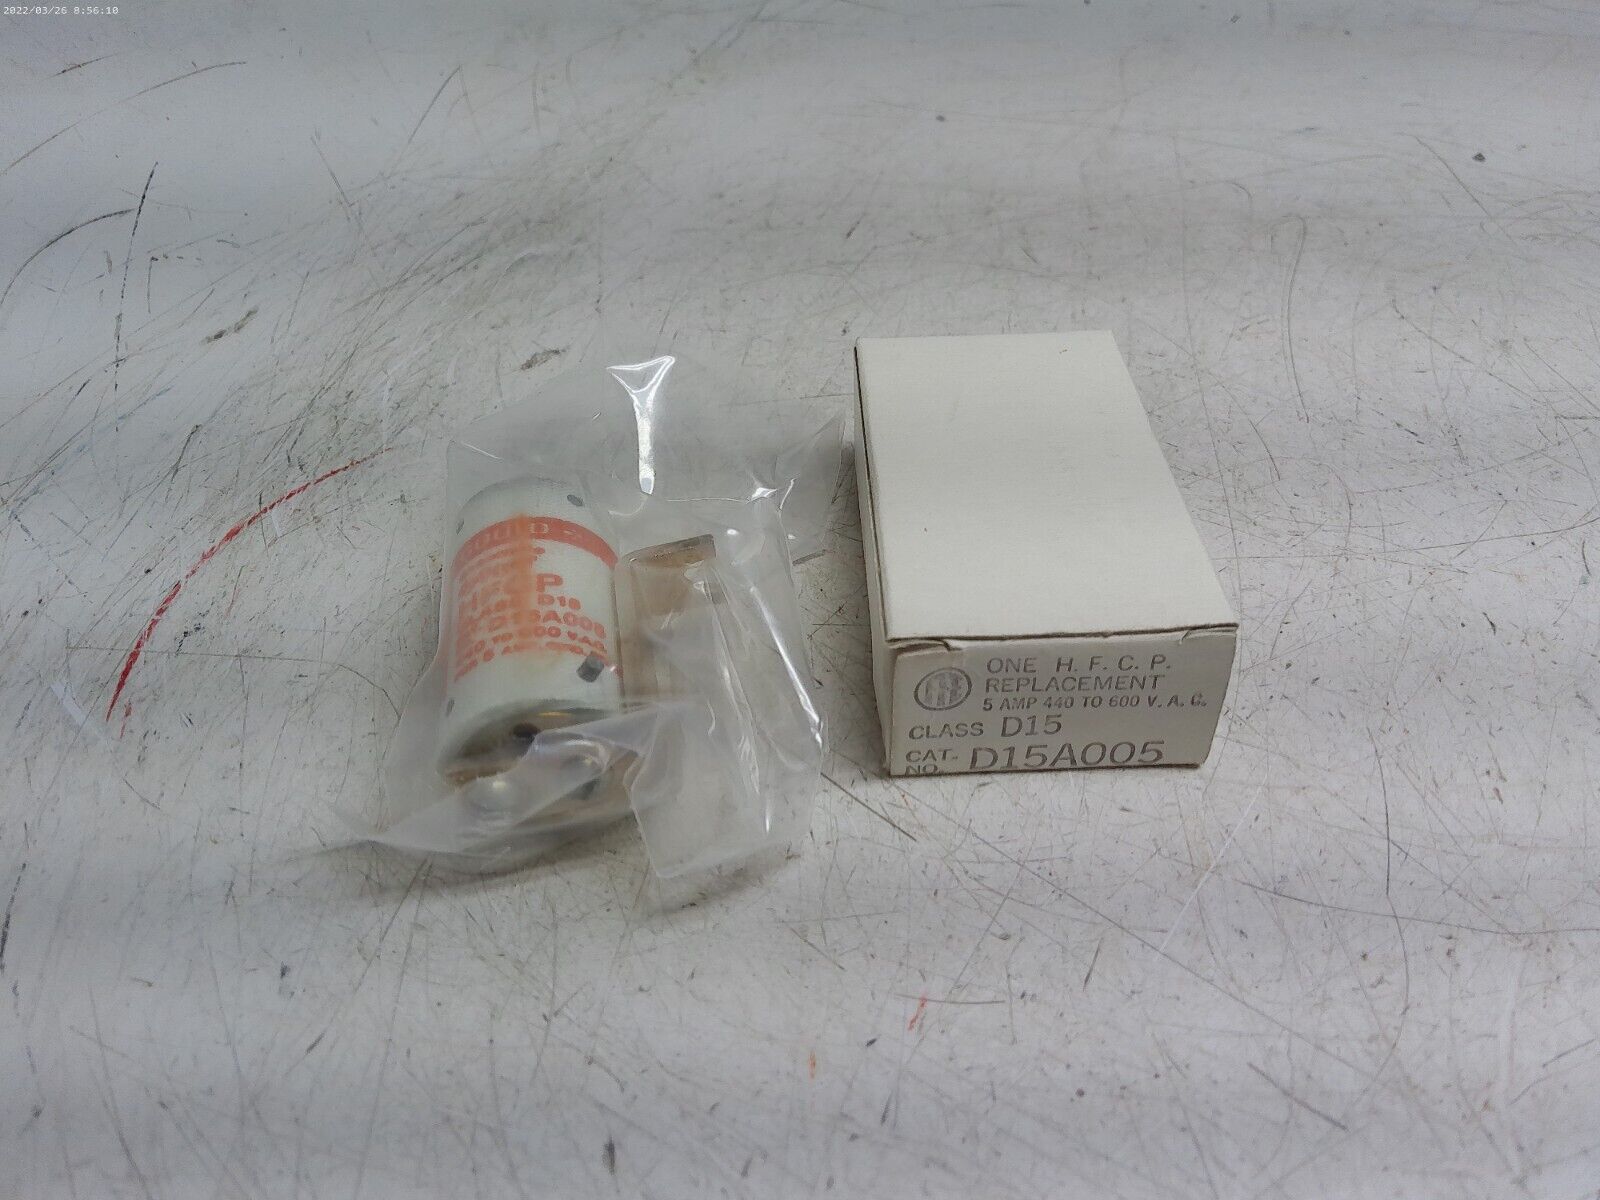 New in box Gould Shawmut D15A005 Fuse HFCP Class D15 Amp-Trap